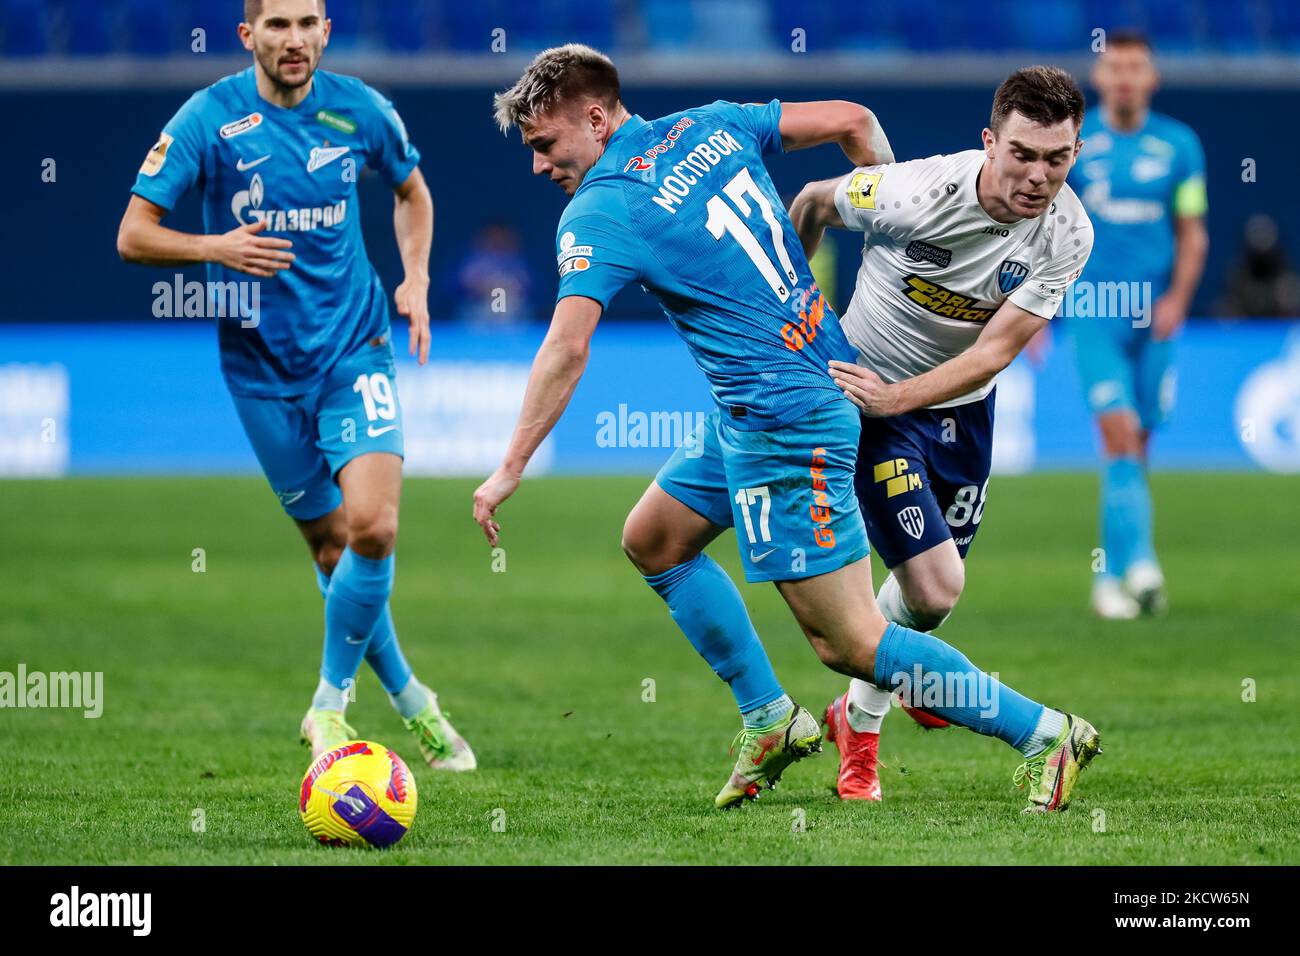 Andrey Mostovoy (N17) of Zenit St. Petersburg and Ilya Berkovsky of Nizhny Novgorod vie for the ball during the Russian Premier League match between FC Zenit Saint Petersburg and FC Nizhny Novgorod on November 19, 2021 at Gazprom Arena in Saint Petersburg, Russia. (Photo by Mike Kireev/NurPhoto) Stock Photo